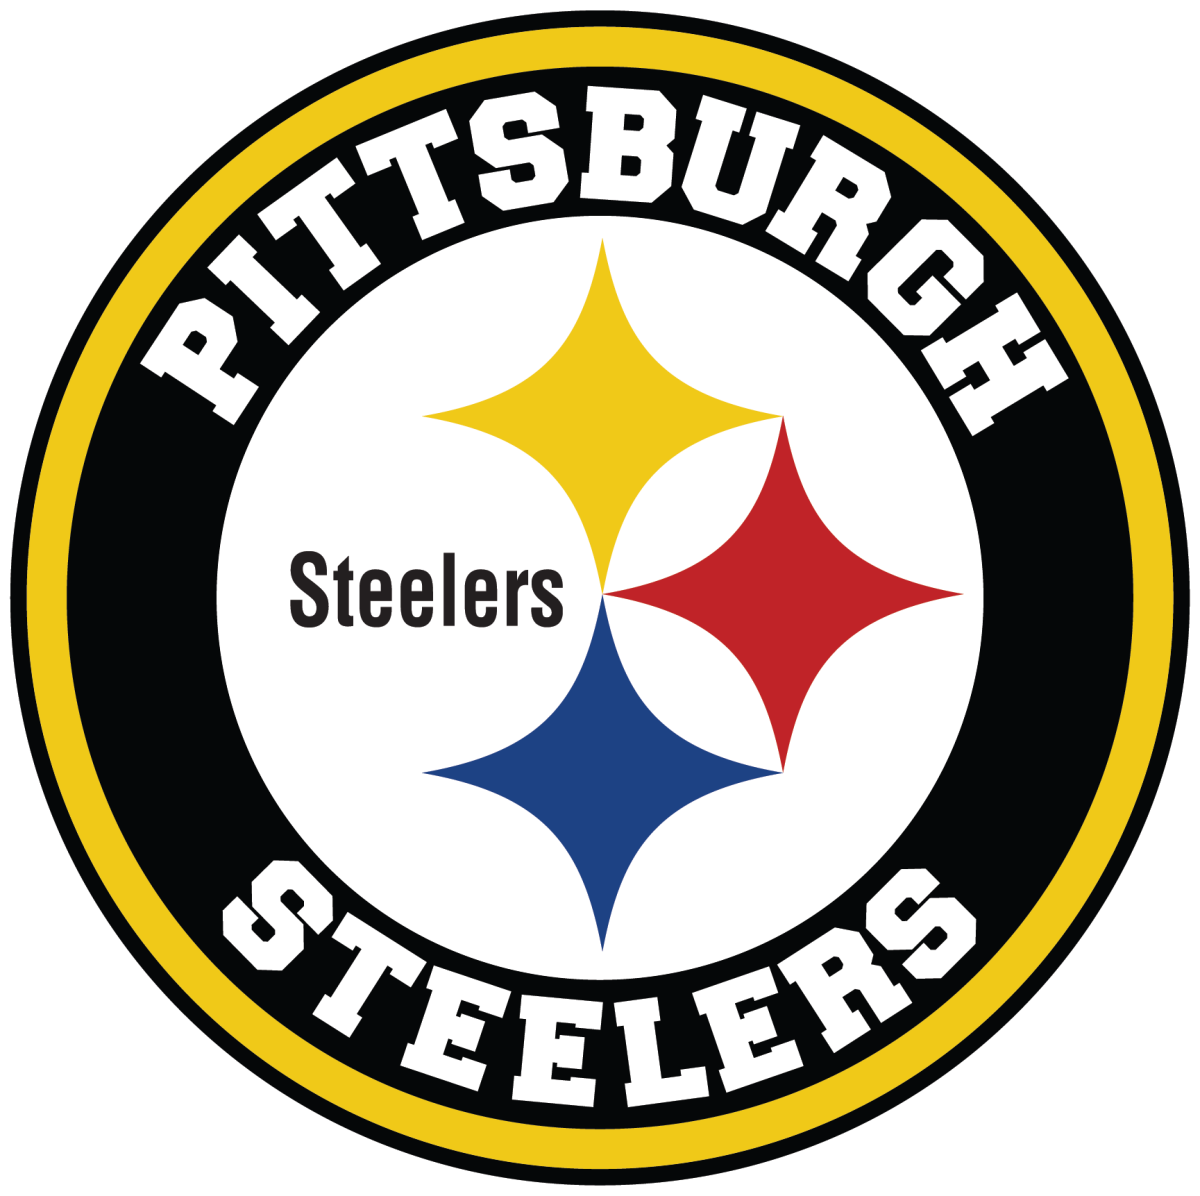 In 1975, the Pittsburgh Steelers were the Super Bowl champs.